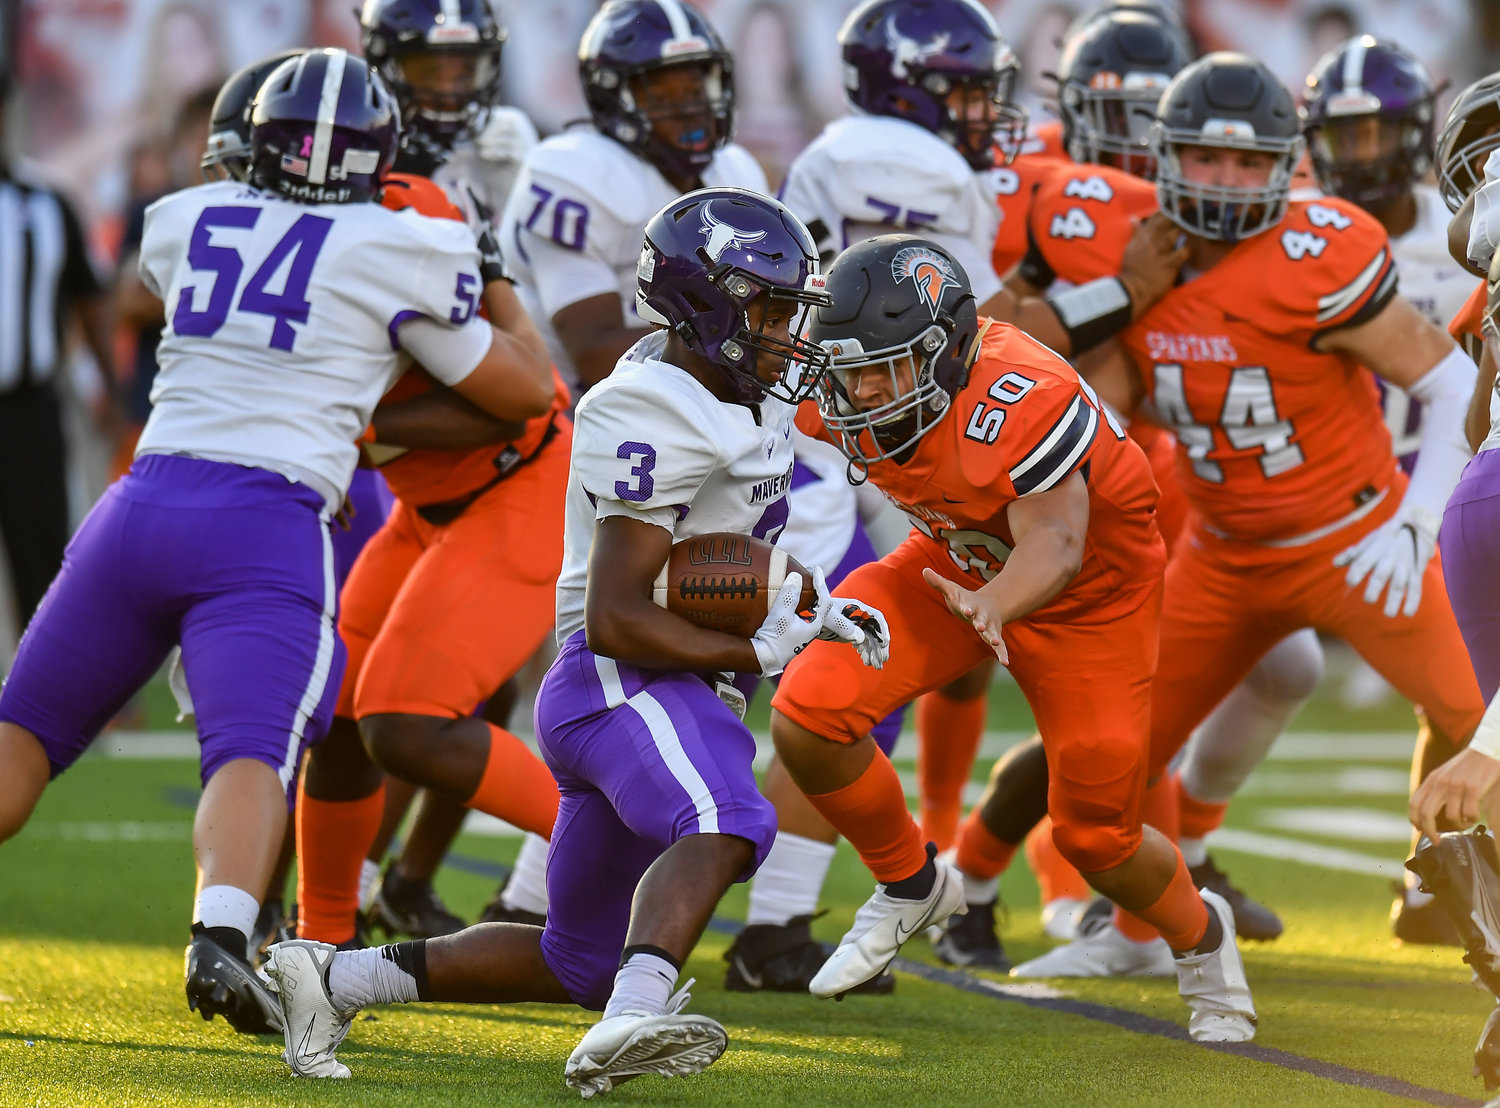 Katy, Tx. Oct 8, 2021: Morton Ranchs Santana Scott #3 carries the ball up the middle during a District 19-6A game between Seven Lakes and Morton Ranch at Legacy Stadium in Katy. In on the stop is Seven Lakes Jonah Thigpen #50. (Photo by Mark Goodman / Katy Times)